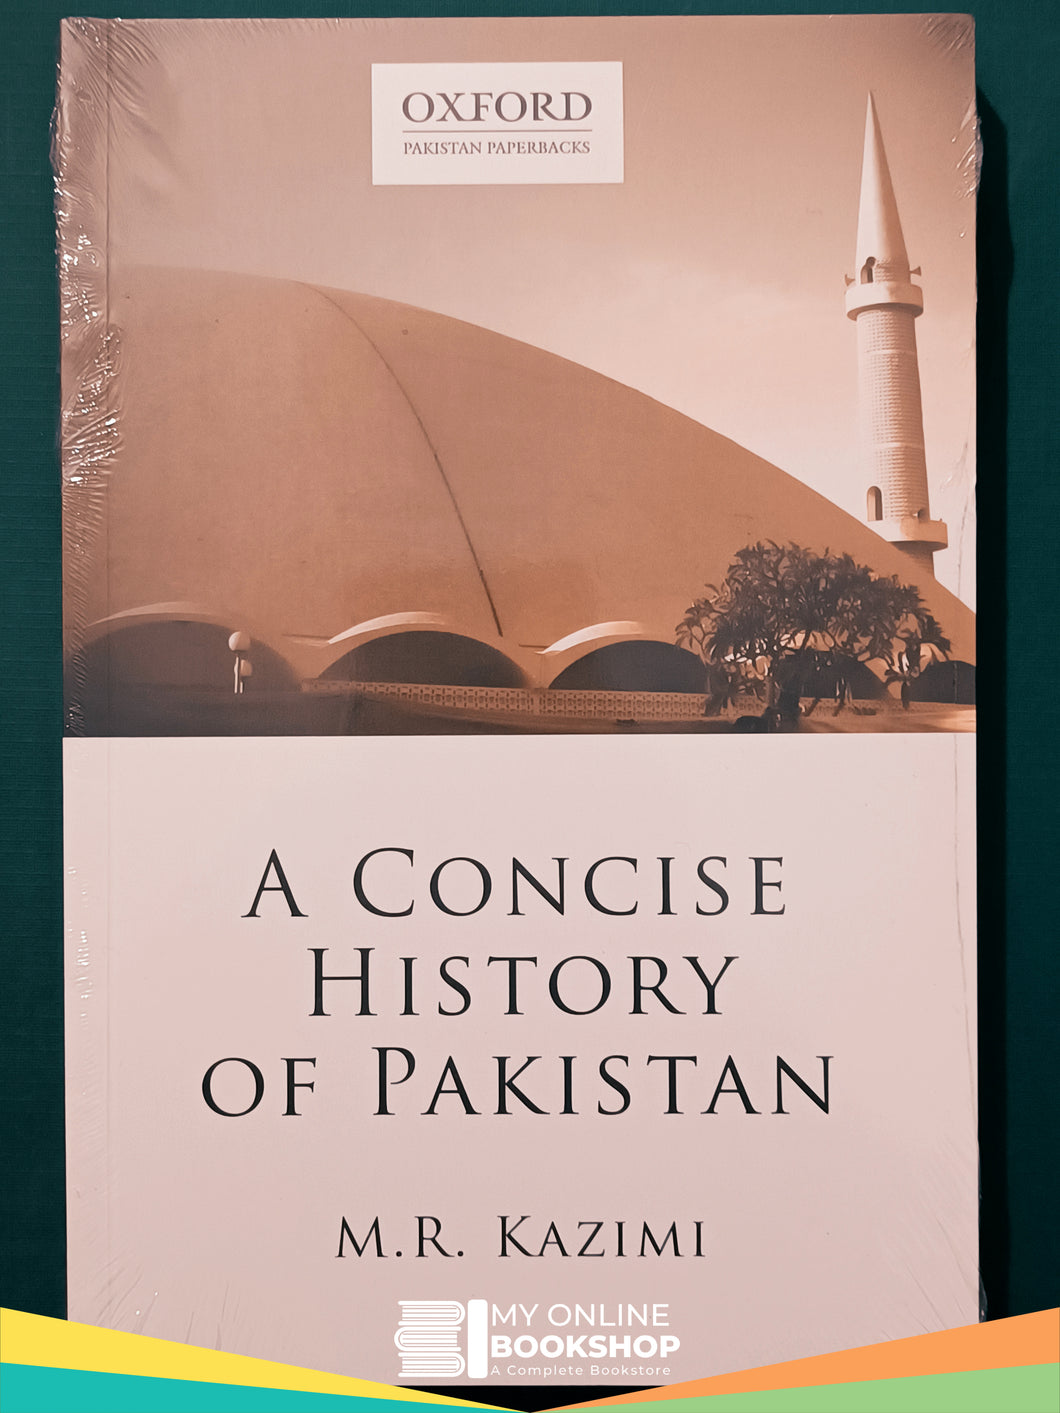 A Concise History of Pakistan